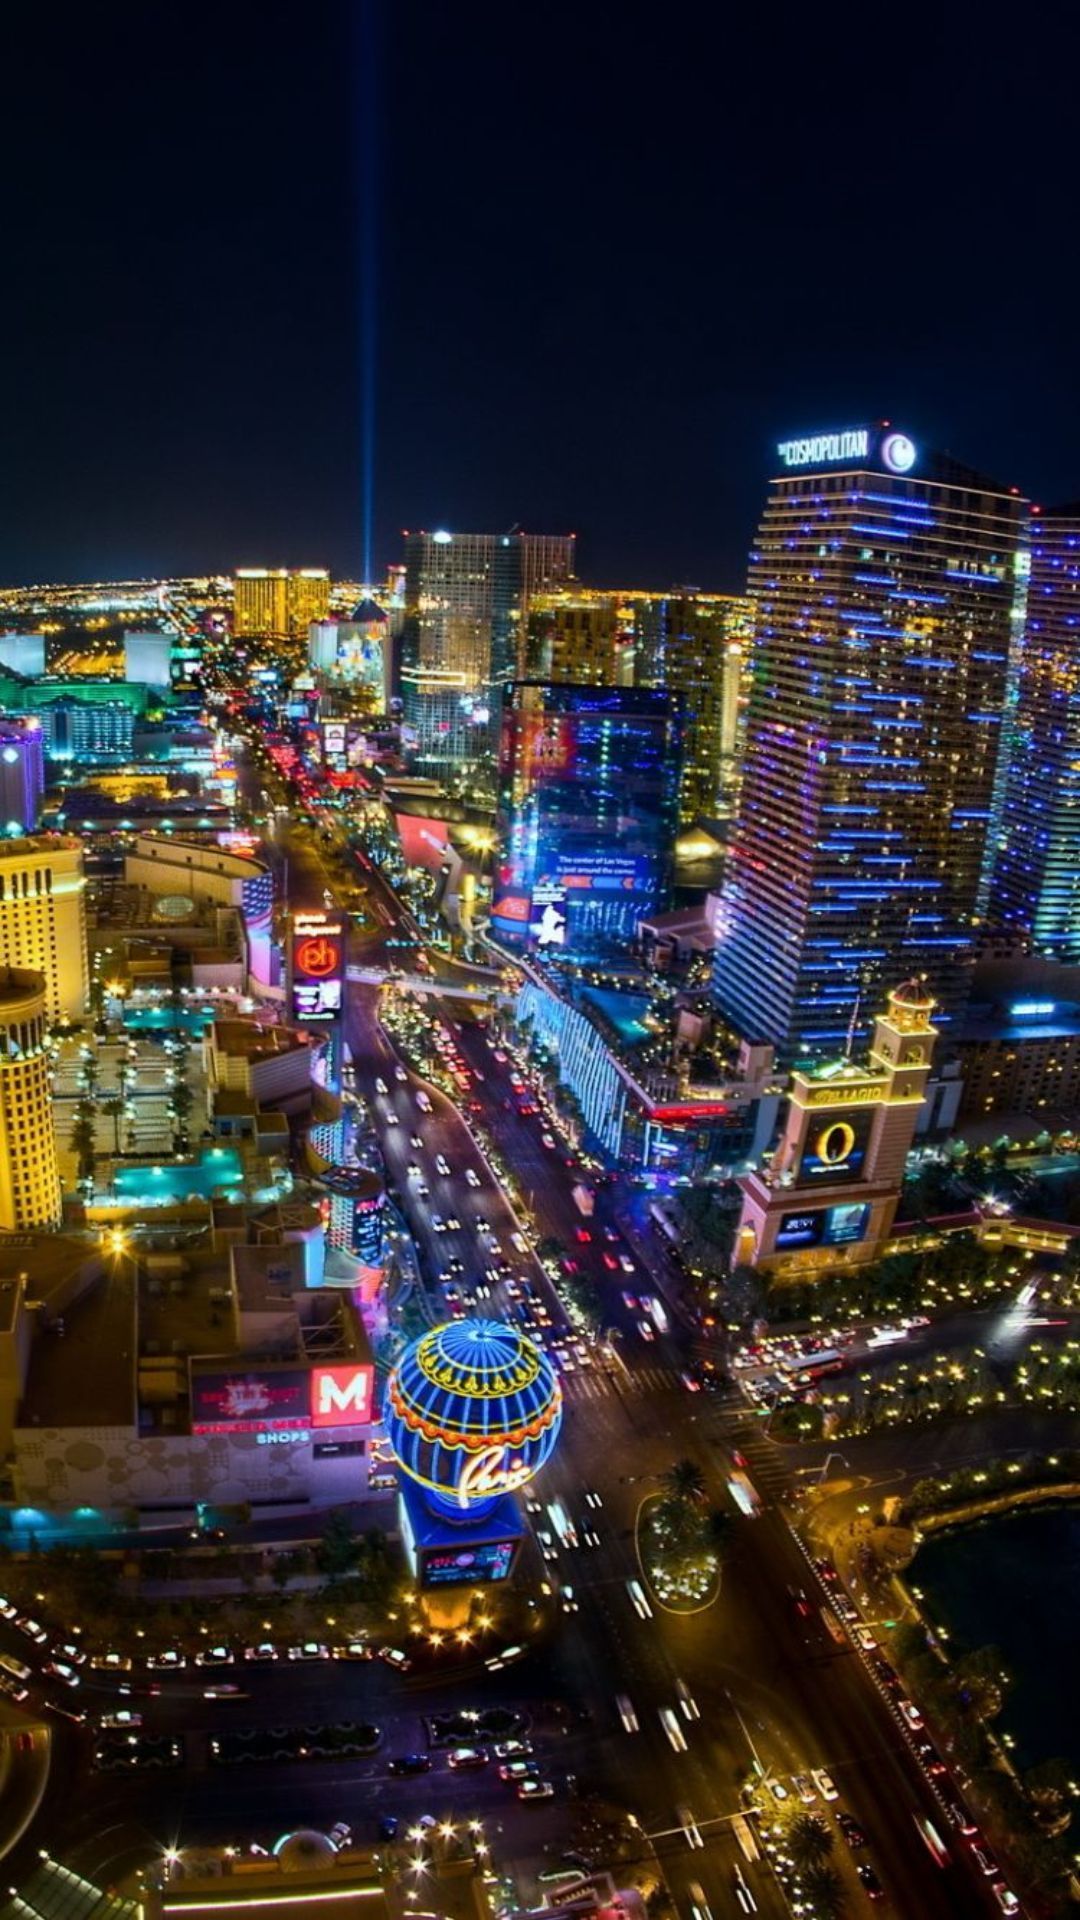 A cityscape at night with bright lights and tall buildings. - Las Vegas